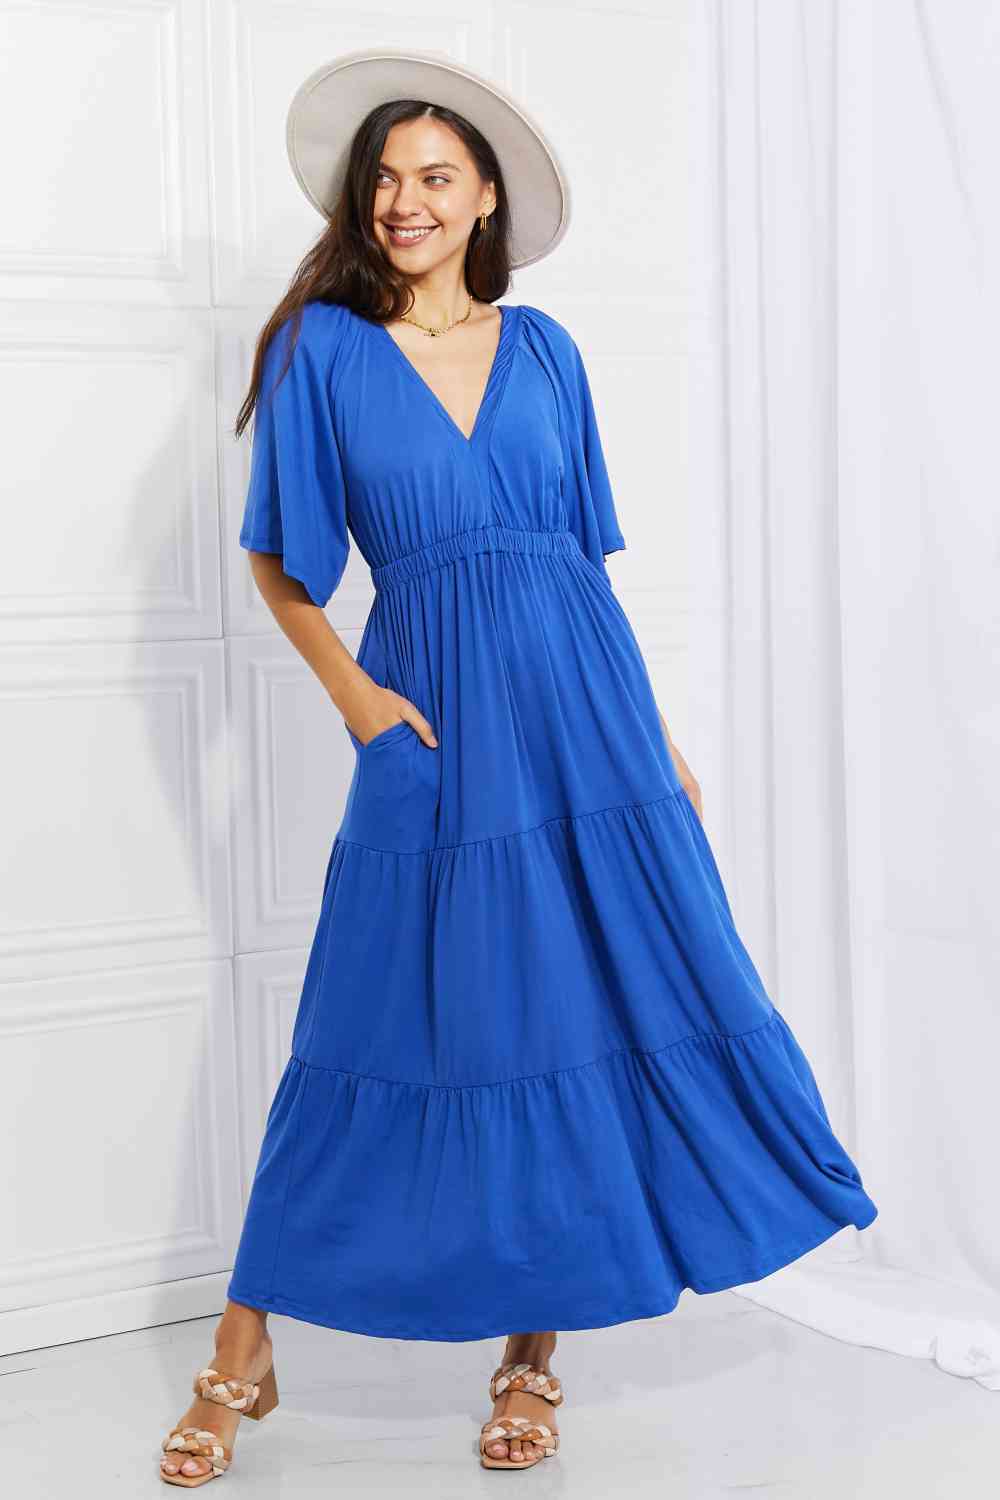 My Muse Flare Sleeve Tiered Maxi Dress - Cobalt Blue / S - All Dresses - Dresses - 1 - 2024